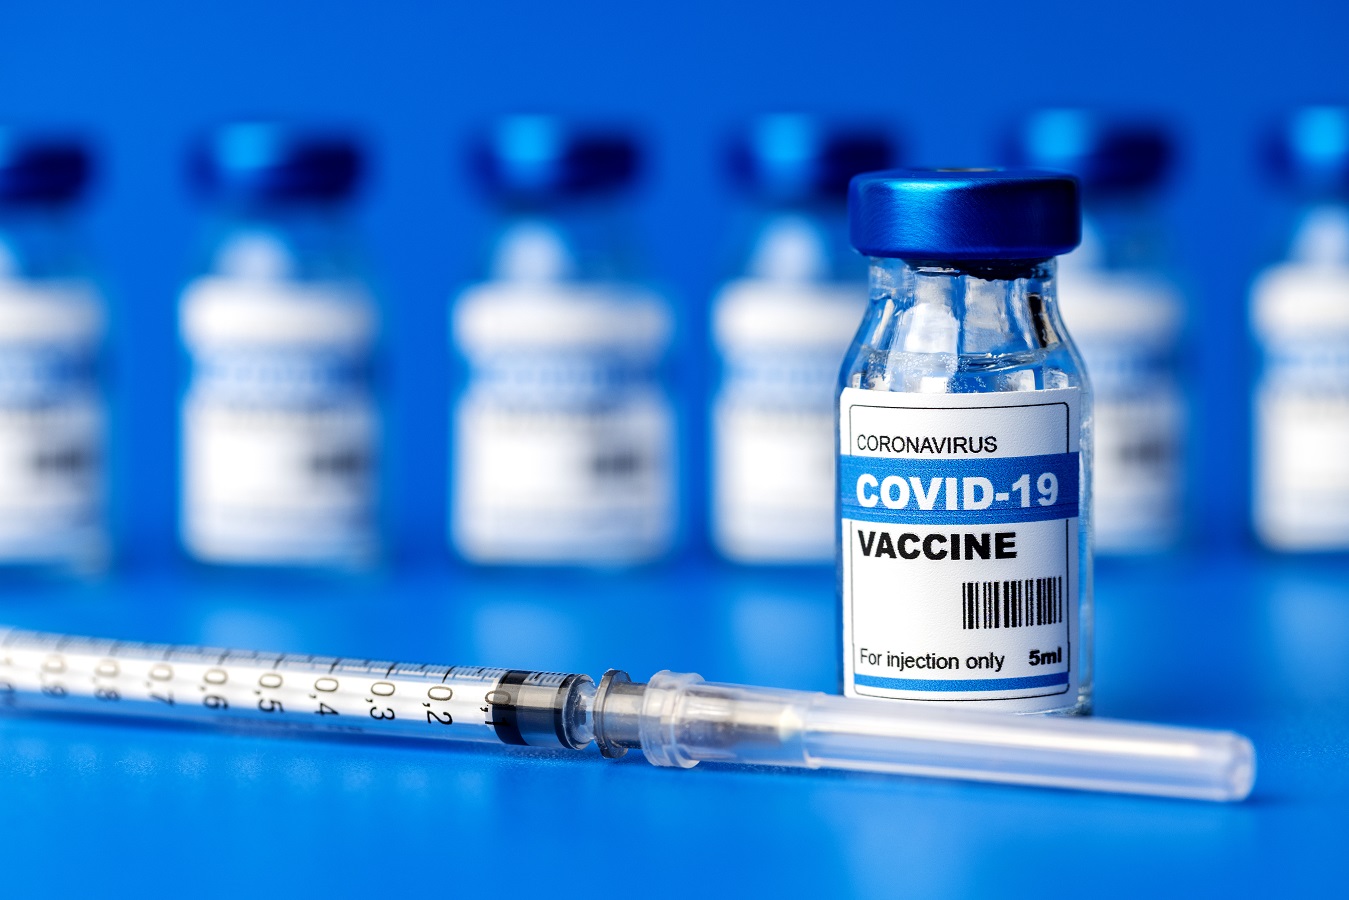 Mixing of vaccines produces higher antibody response: Study